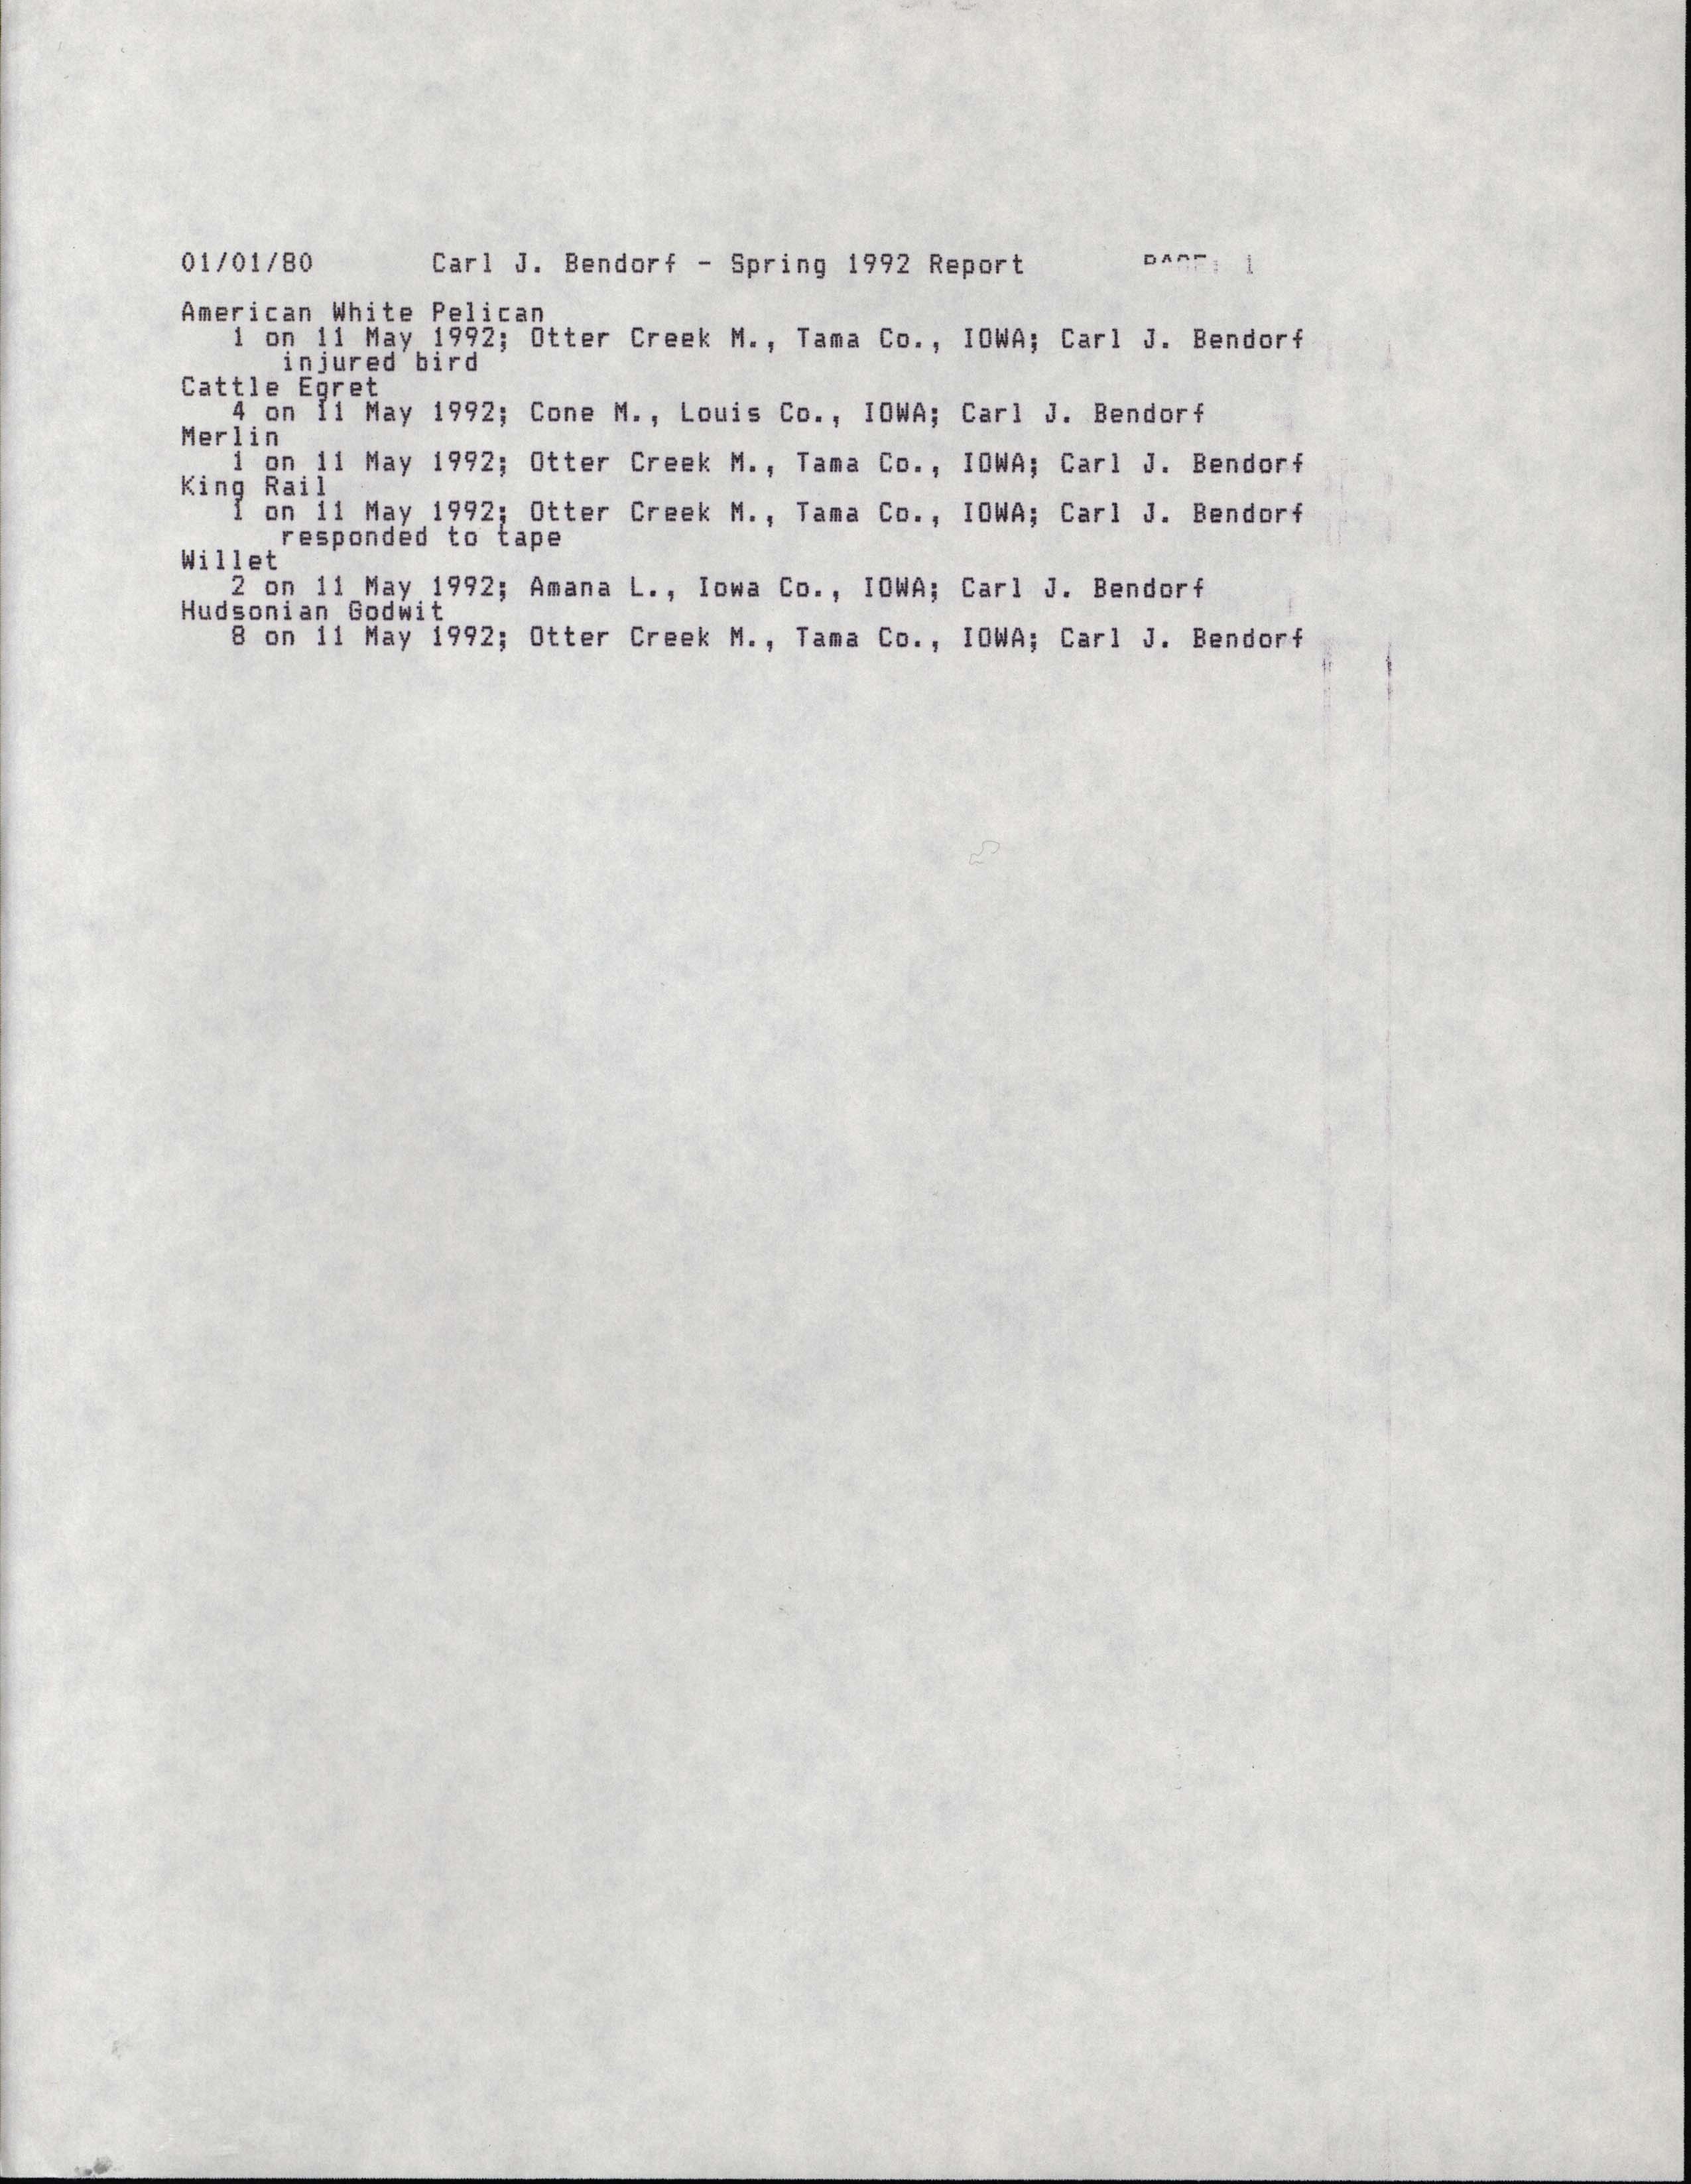 Field notes contributed by Carl J. Bendorf, spring 1992